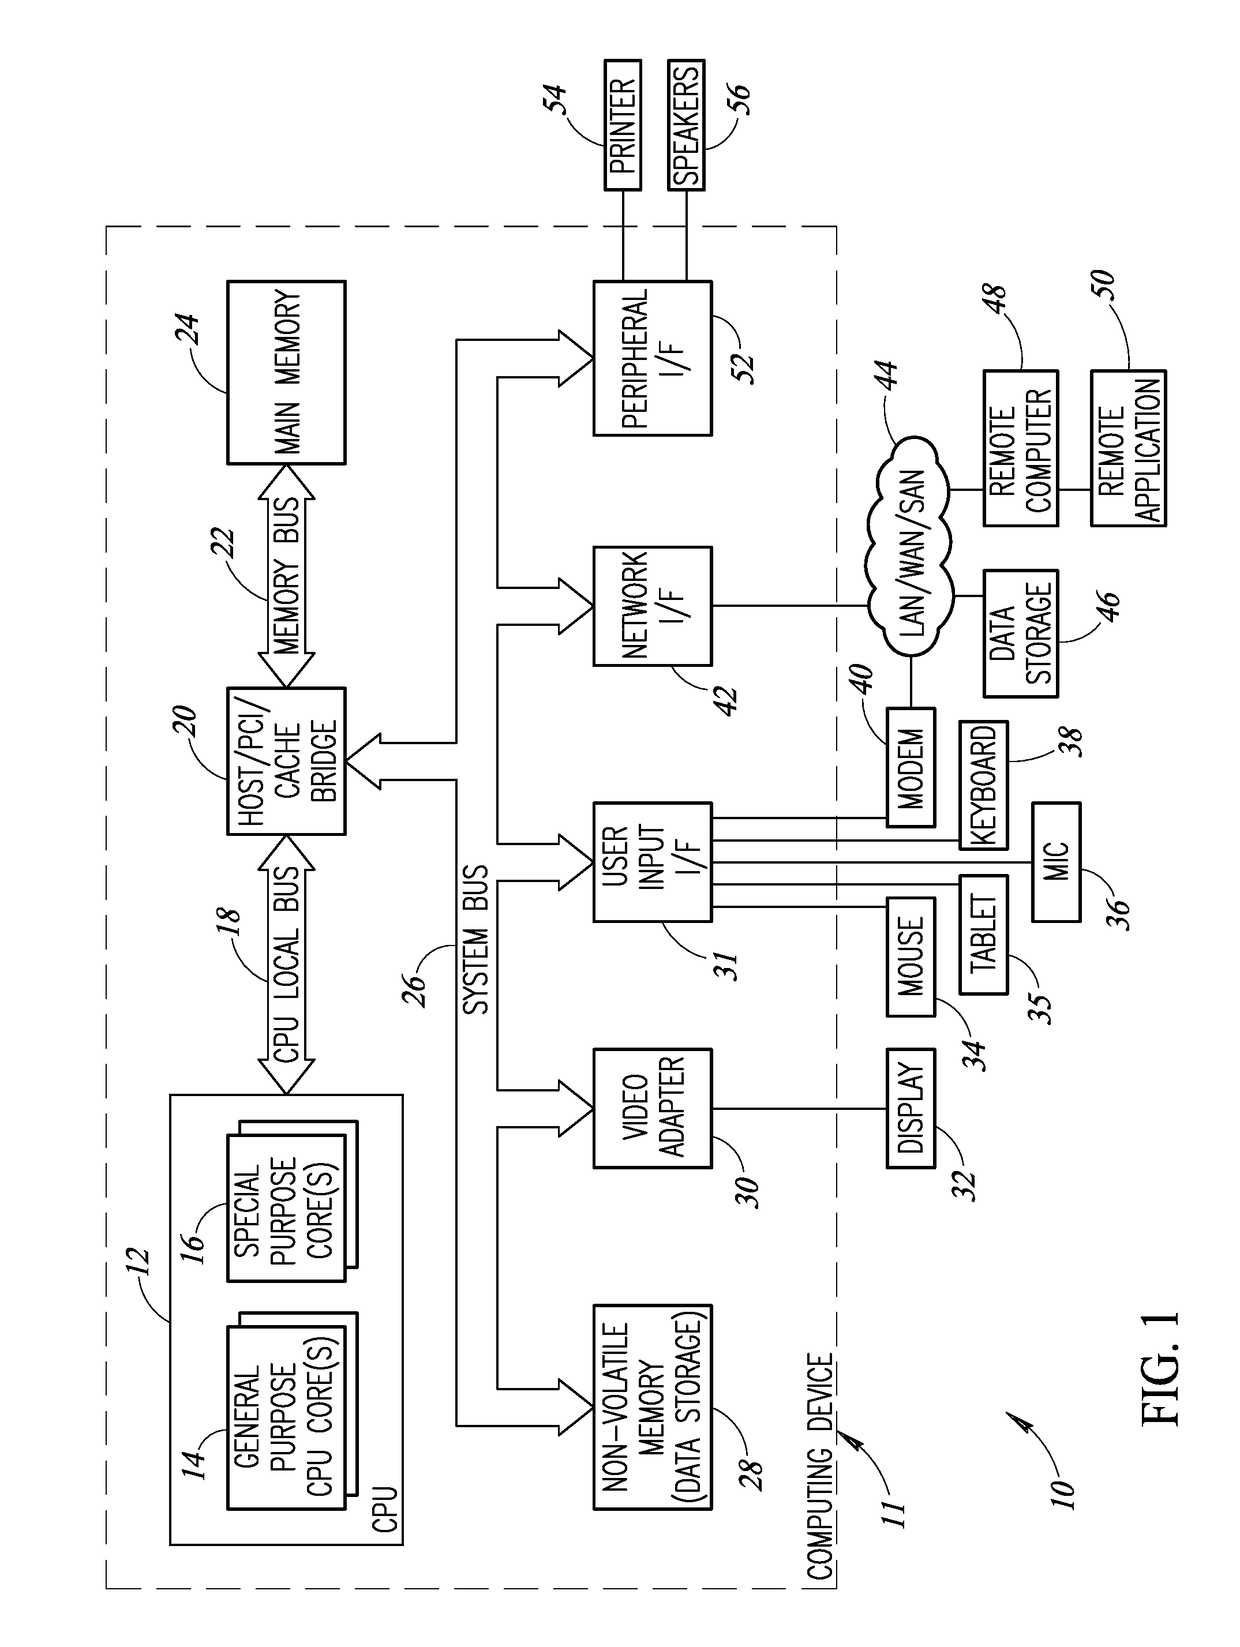 System And Method Of Memory Access Of Multi-Dimensional Data